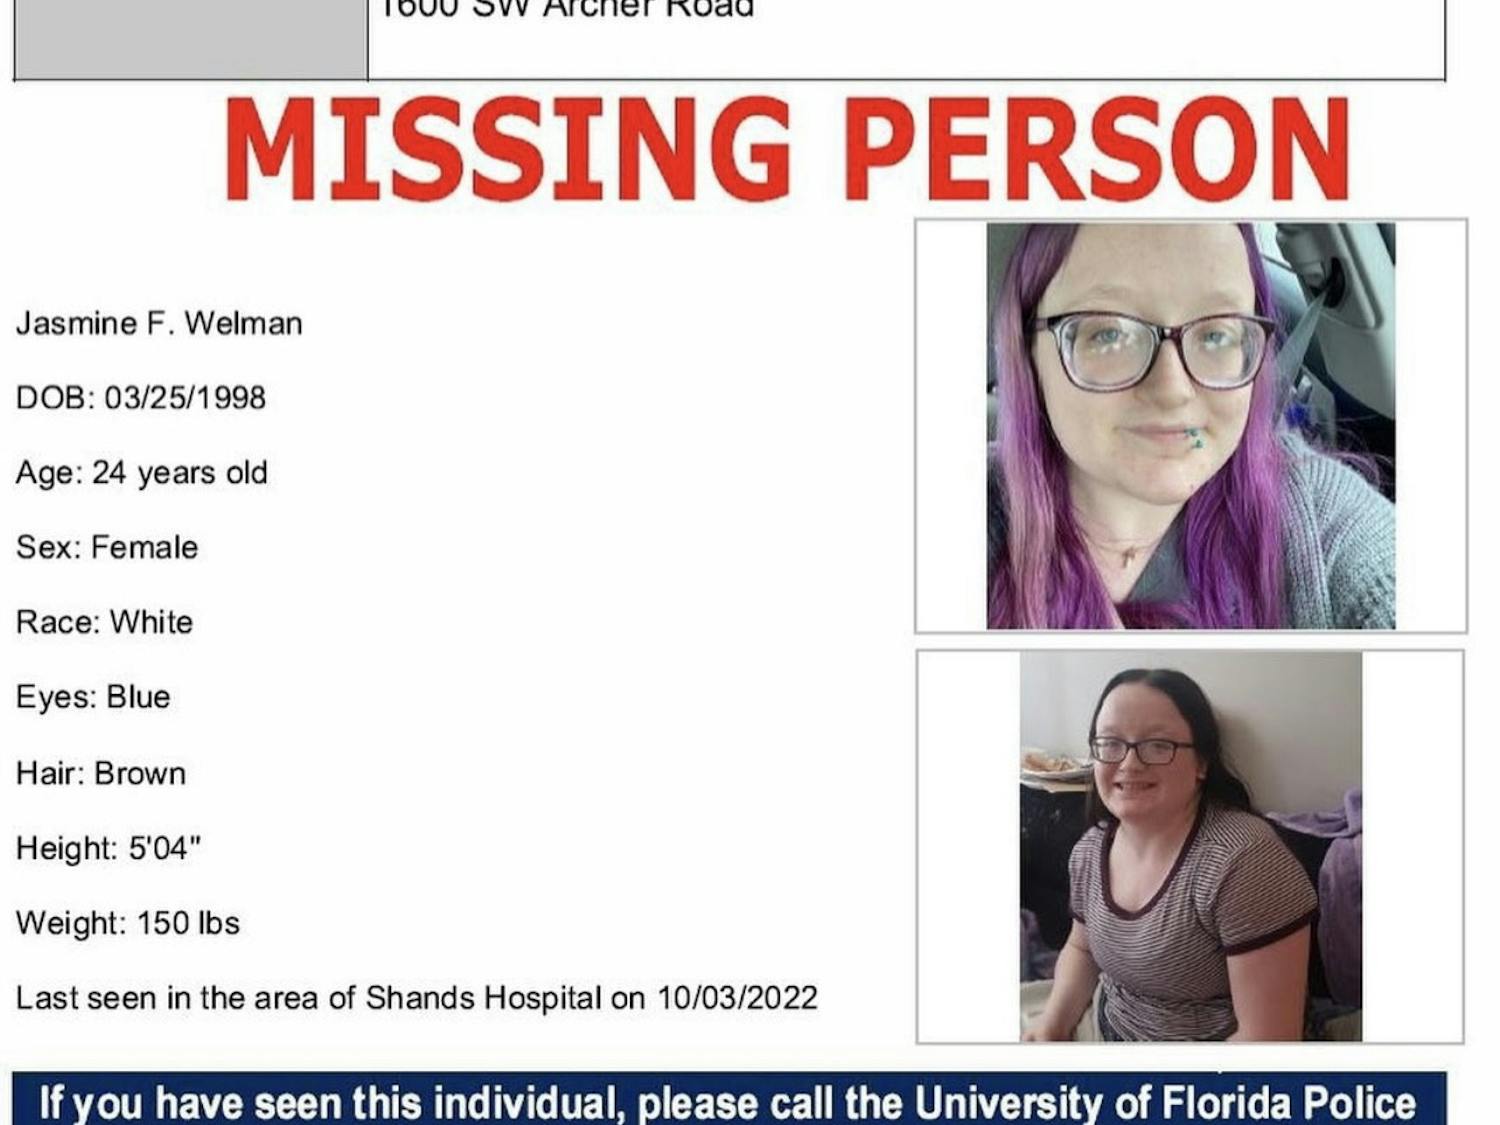 A screenshot from the UF Public Safety Instagram showing Jasmine Welman&#x27;s missing person bulletin. ﻿